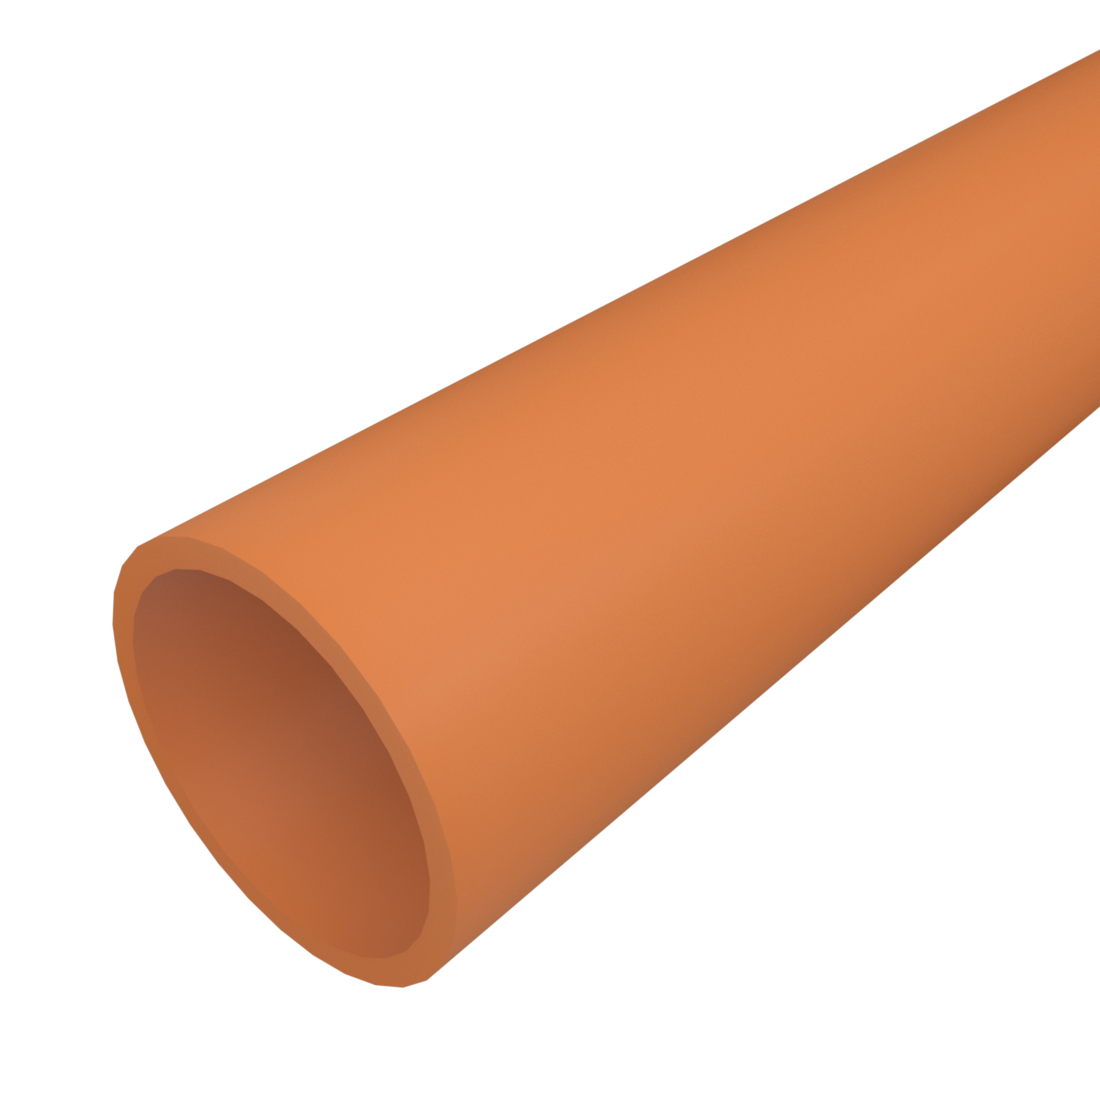 HDPE Pipe and Conduit